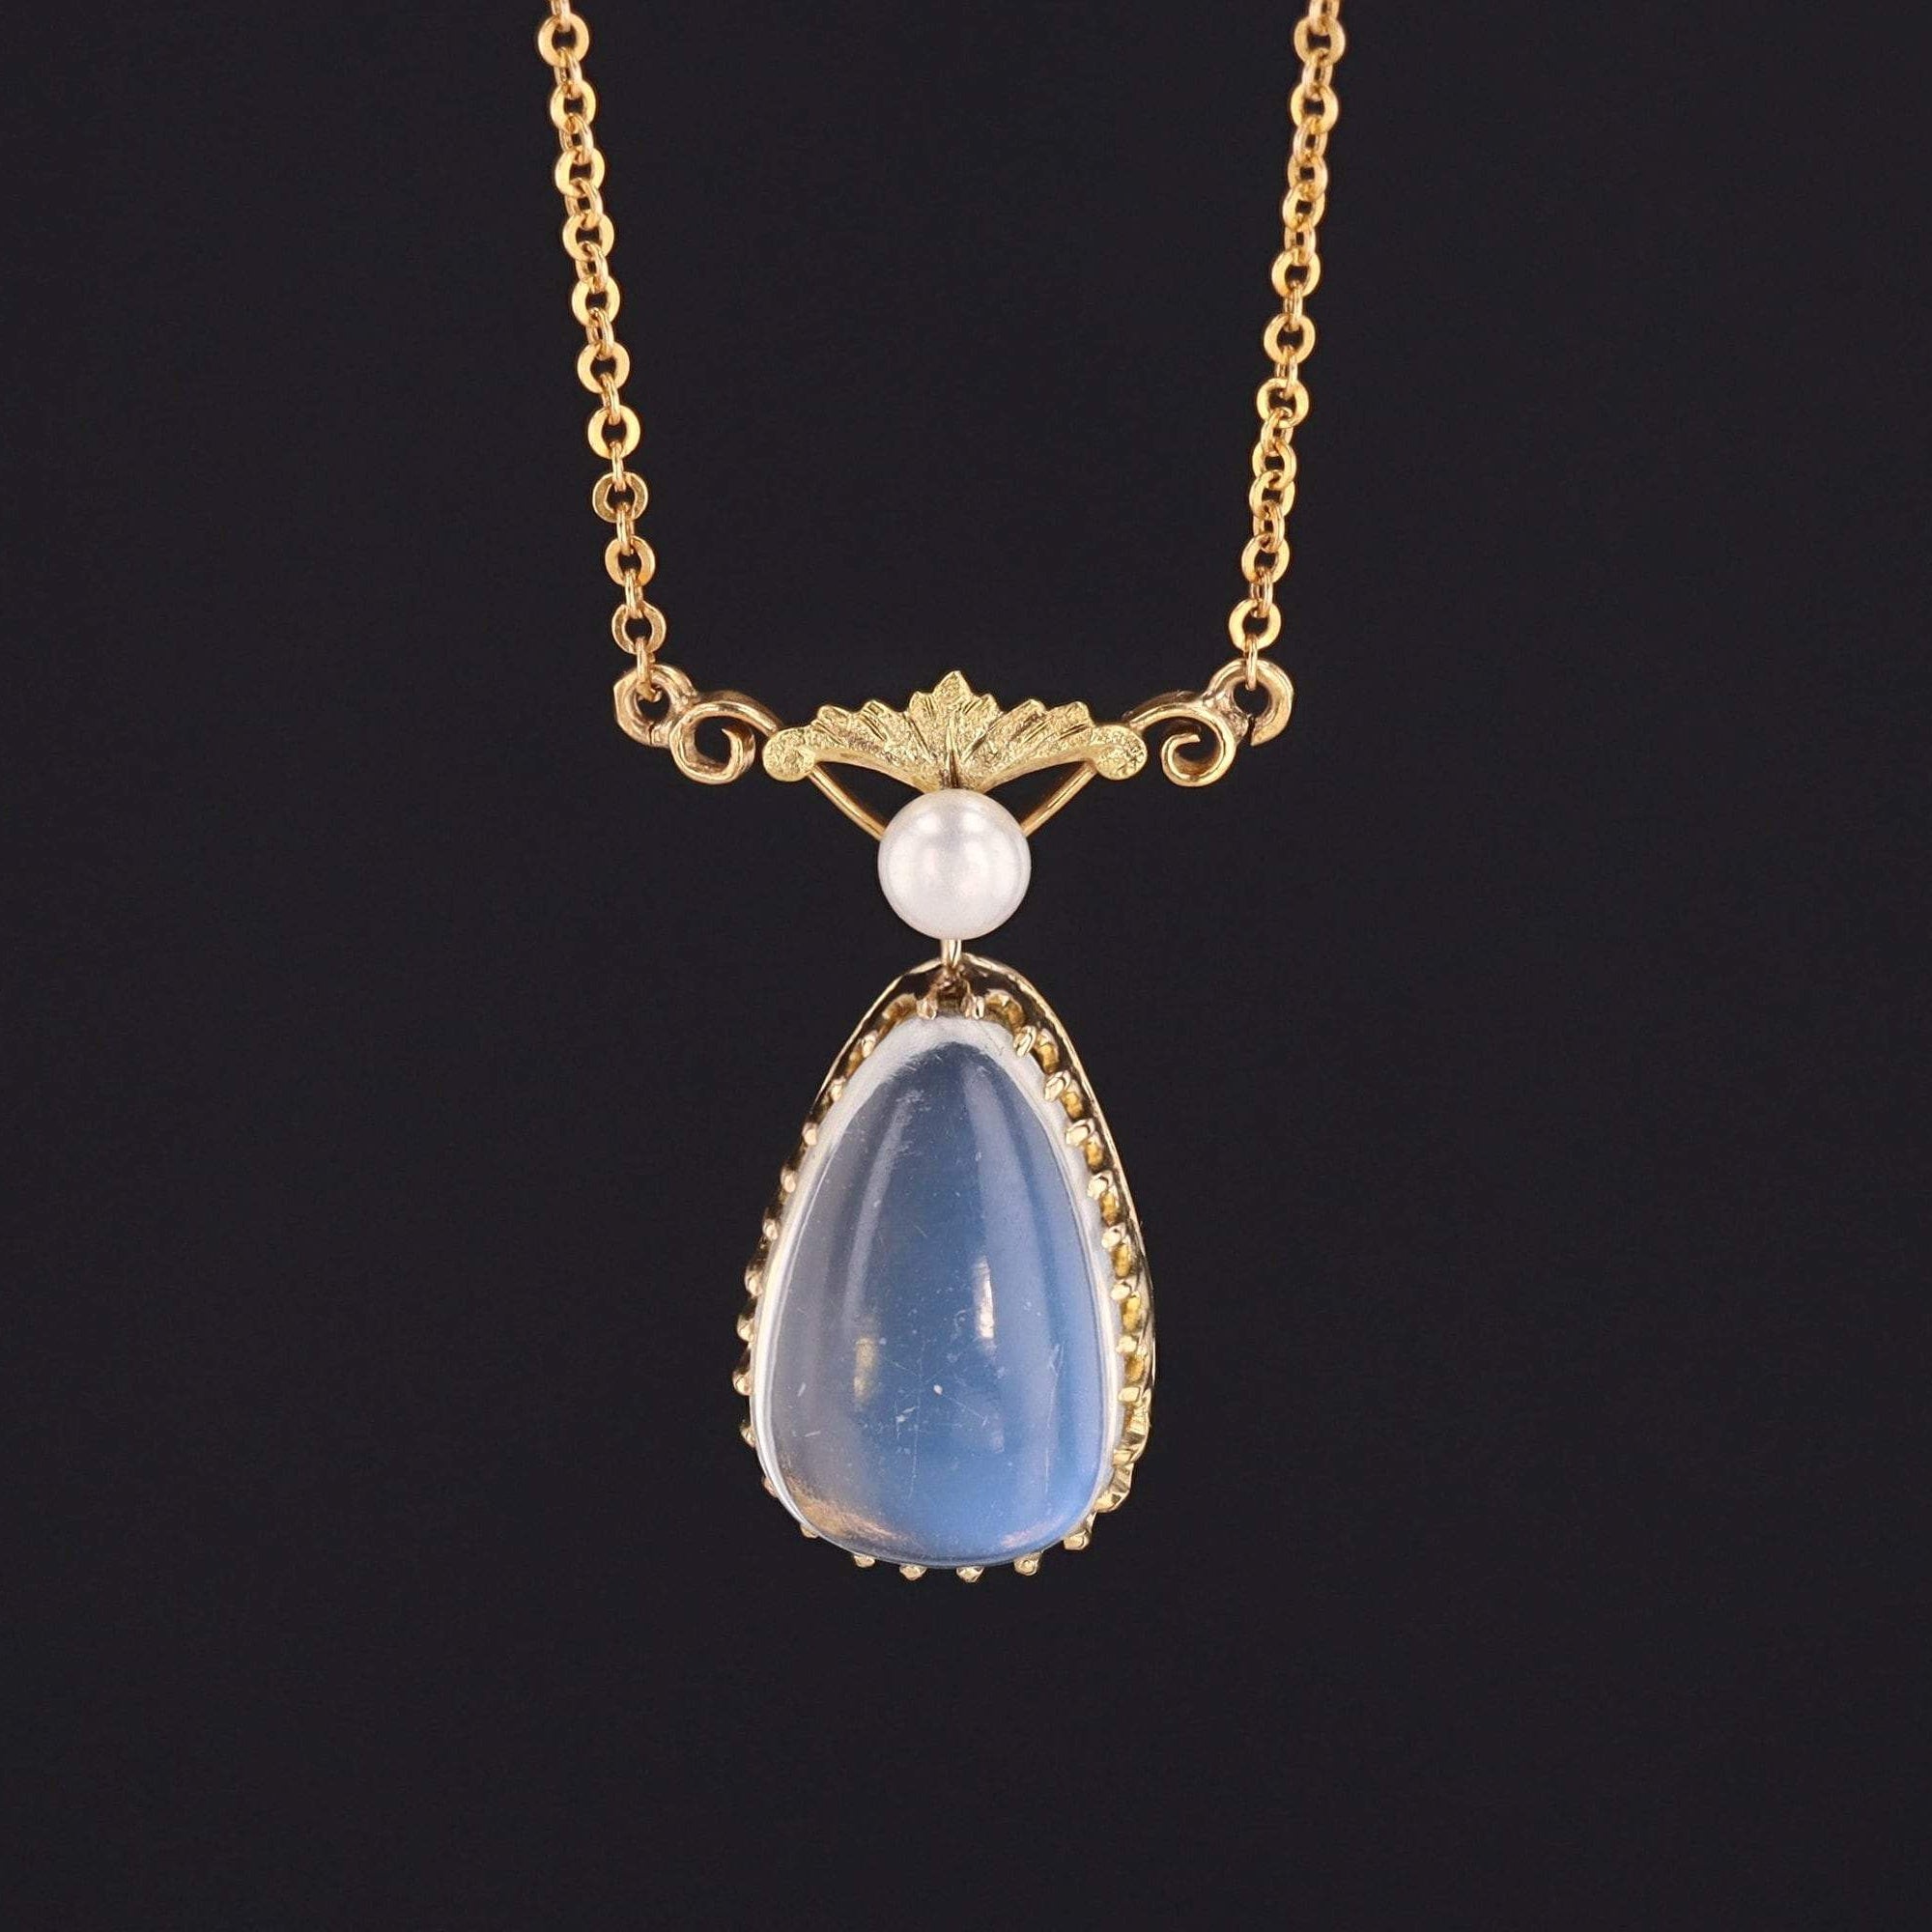 Antique Moonstone Necklace | 14k Gold Moonstone & Pearl Necklace 